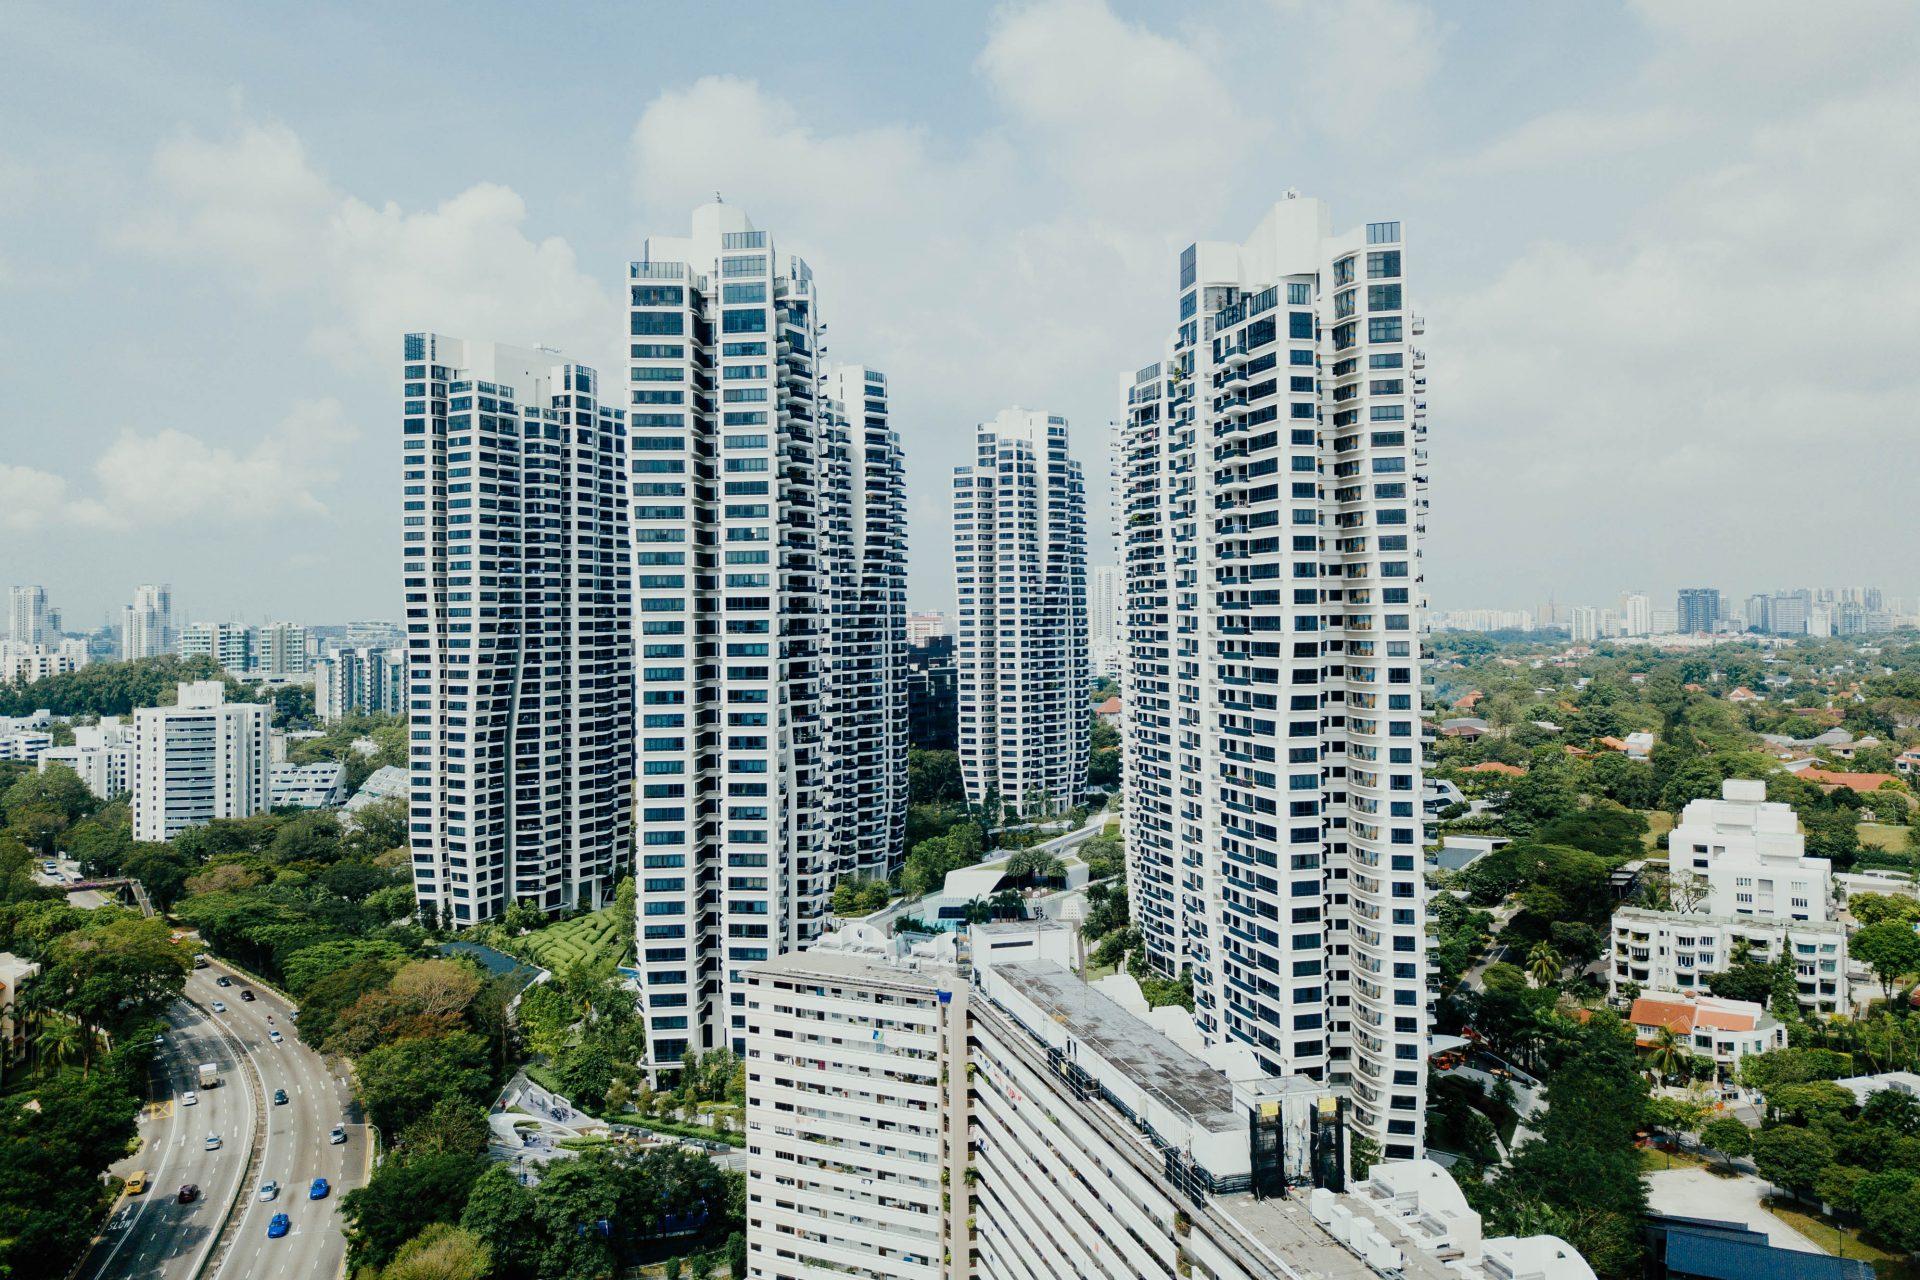 How can foreigners acquire condominium units in the country